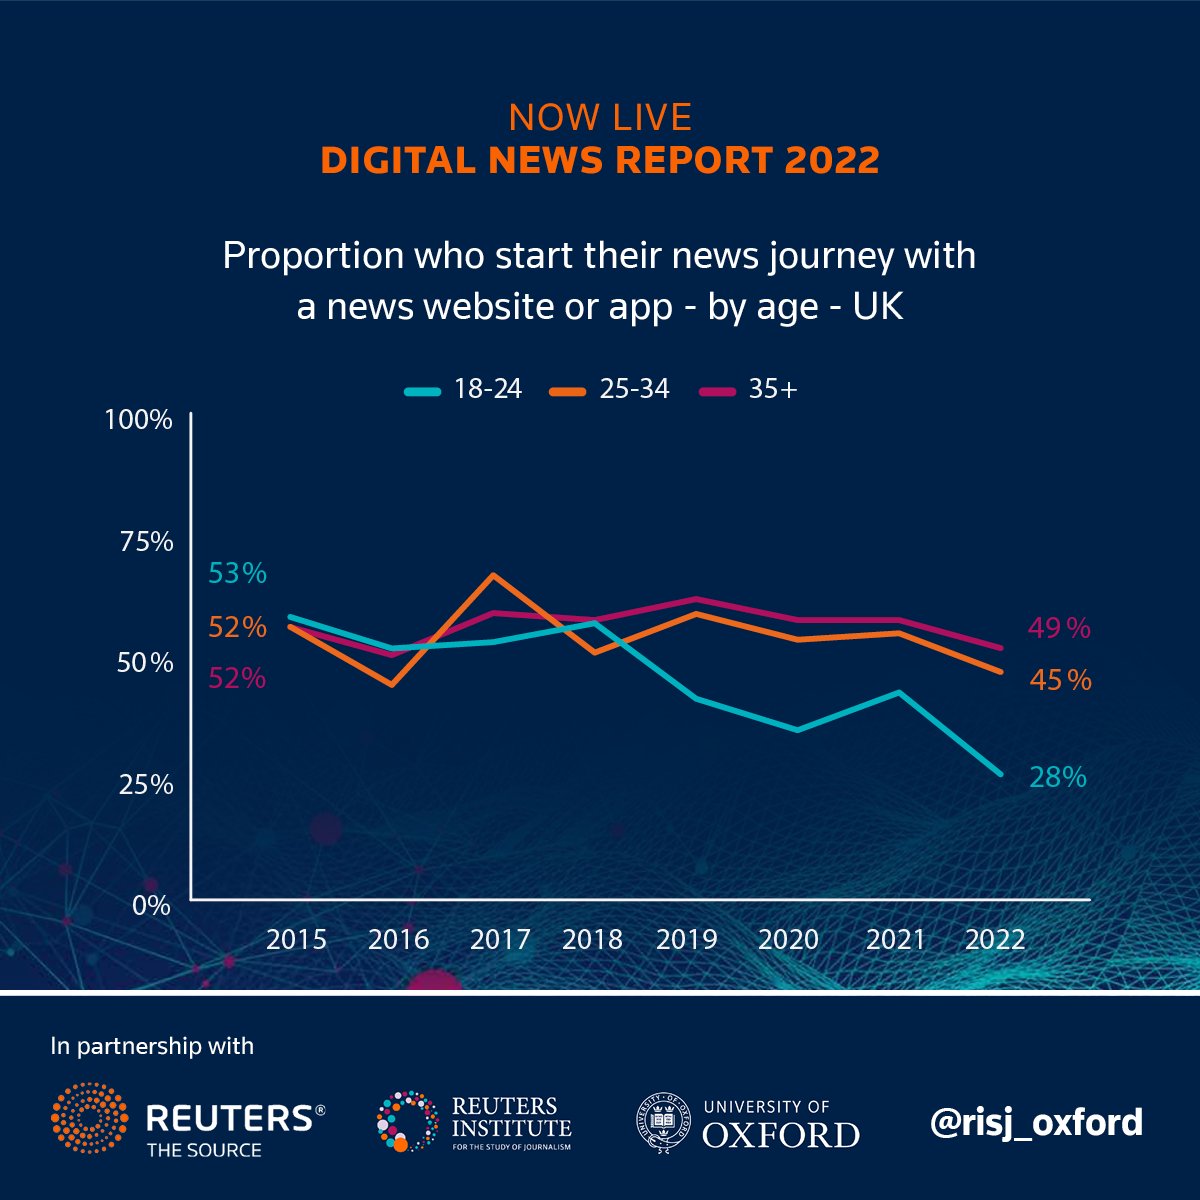 The decline in the number of people aged 18 to 24 who start their news journey with a website or app mirrors the rise in the use of social media by that age group. 

Download the Digital News Report here to learn more:  